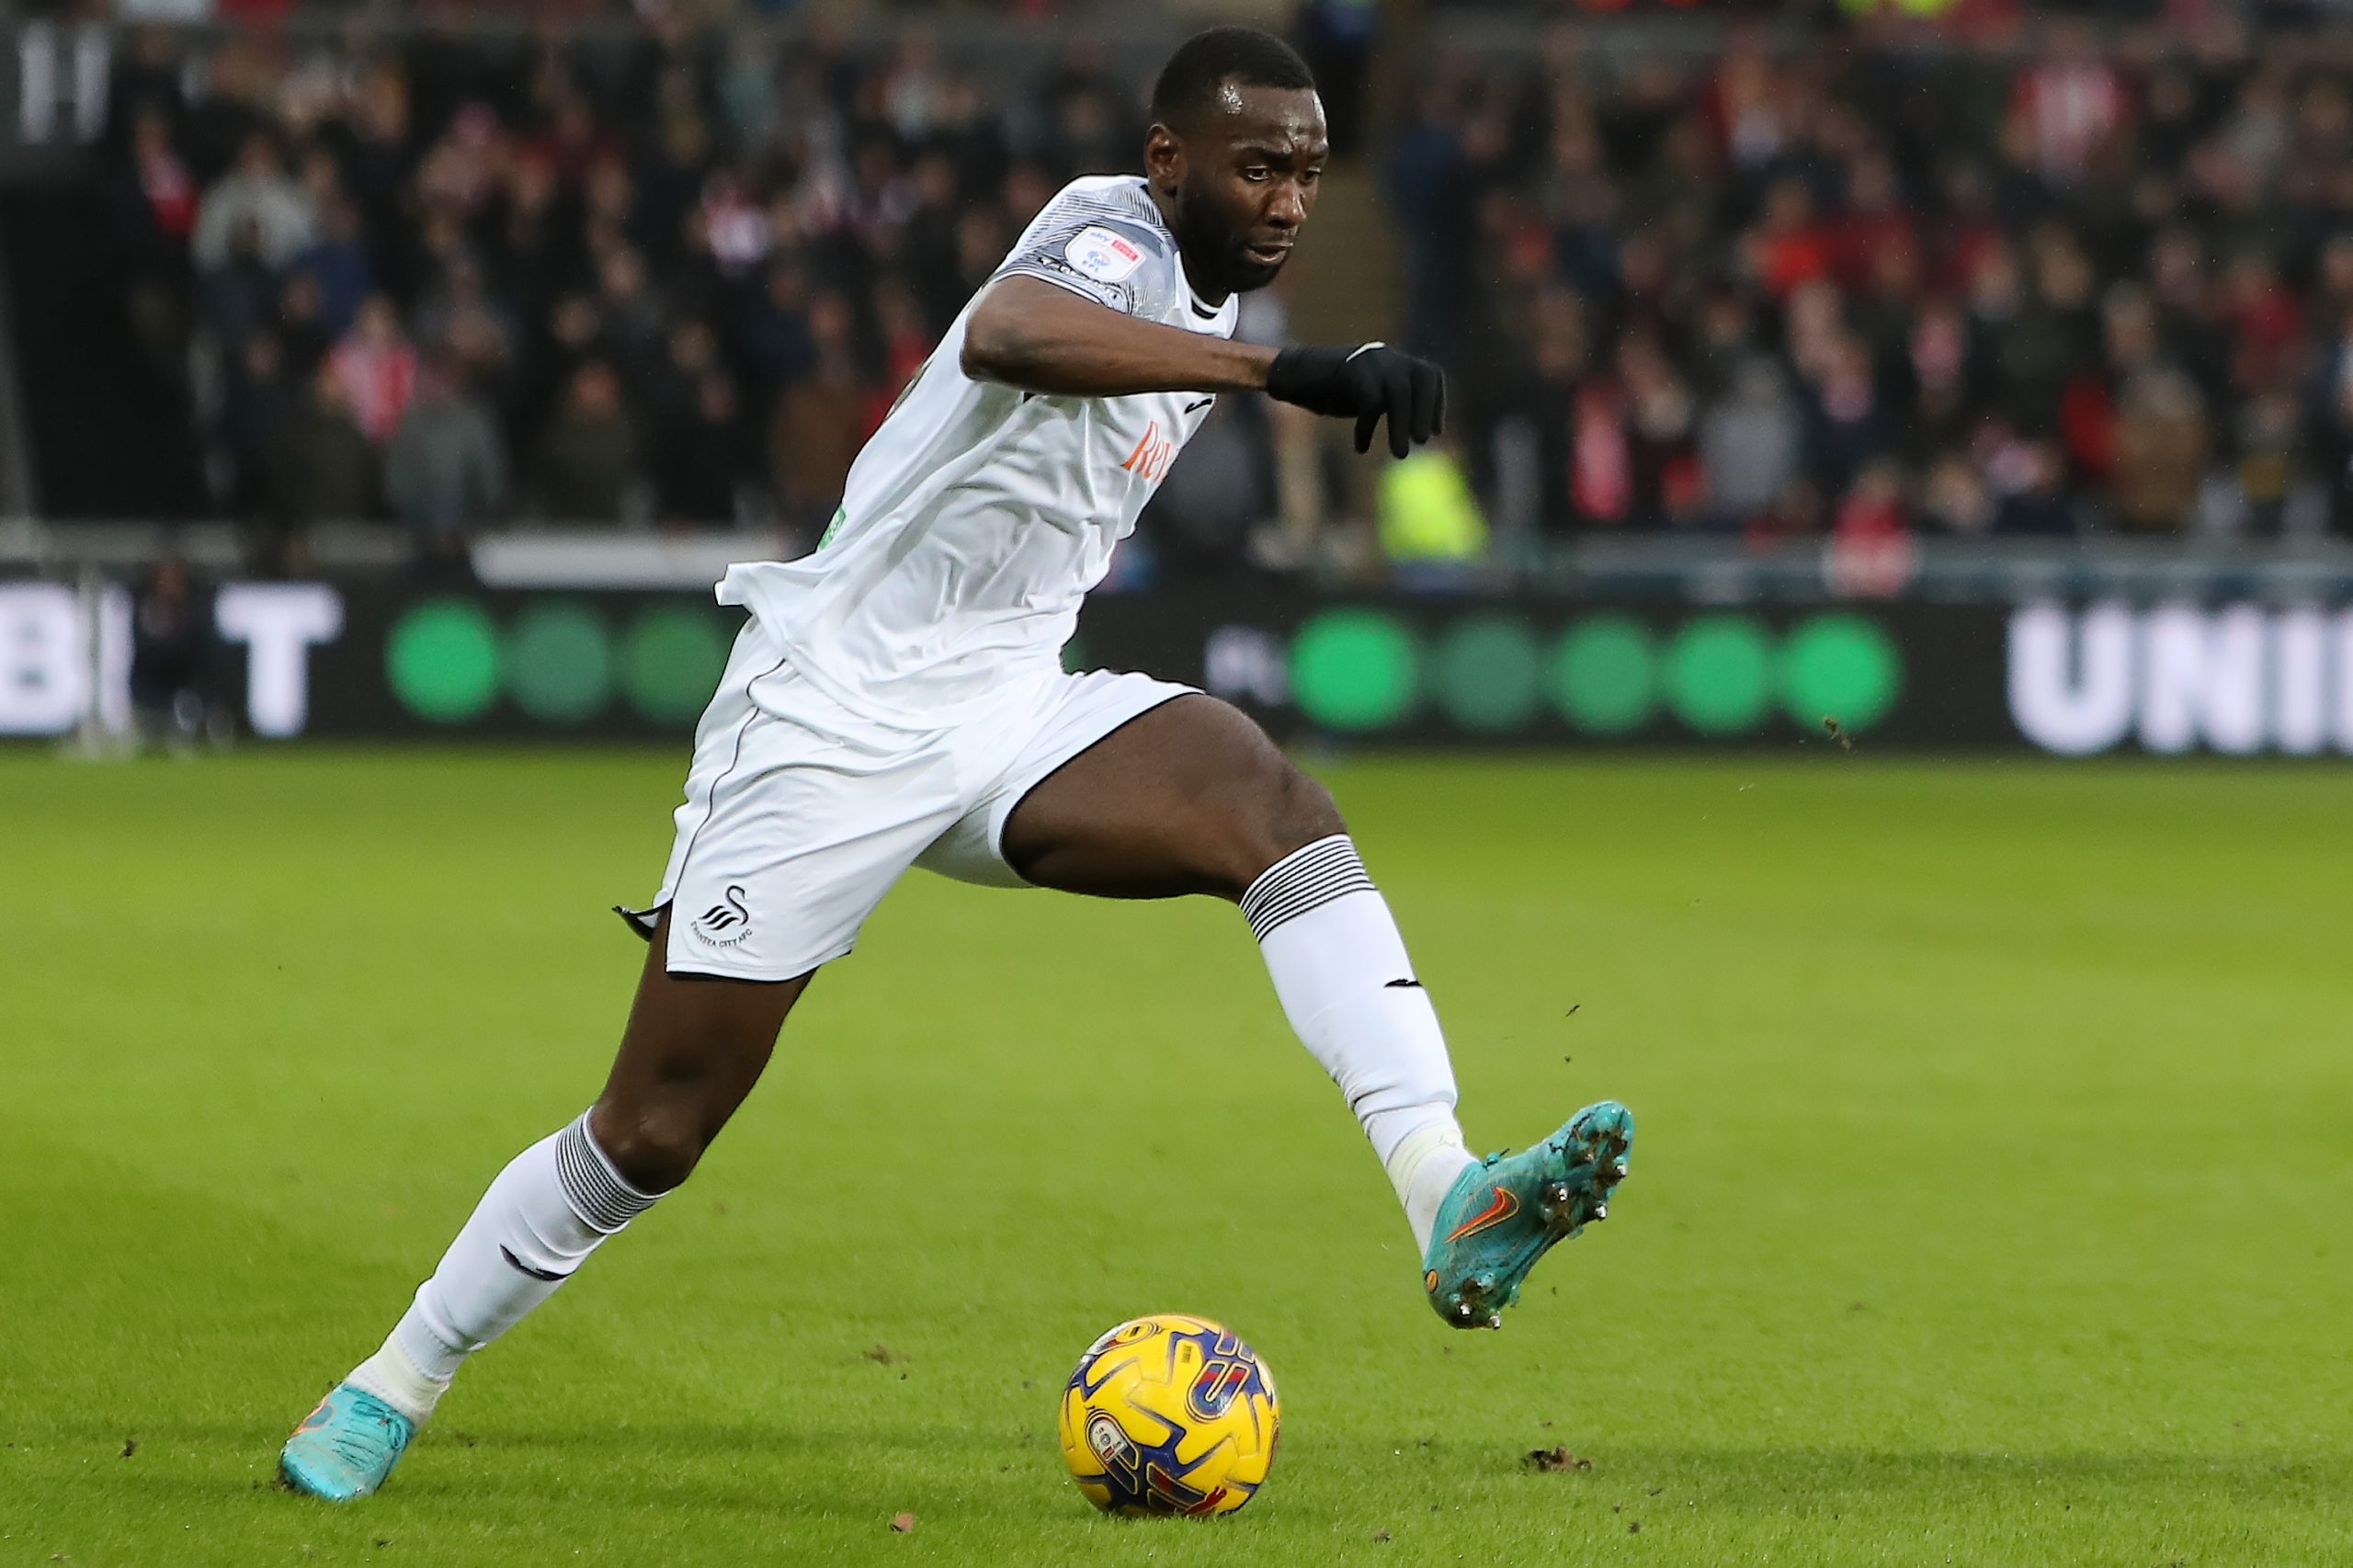 Ex-Premier League cult hero Yannick Bolasie agrees bizarre return to football after being left unemployed by Swansea